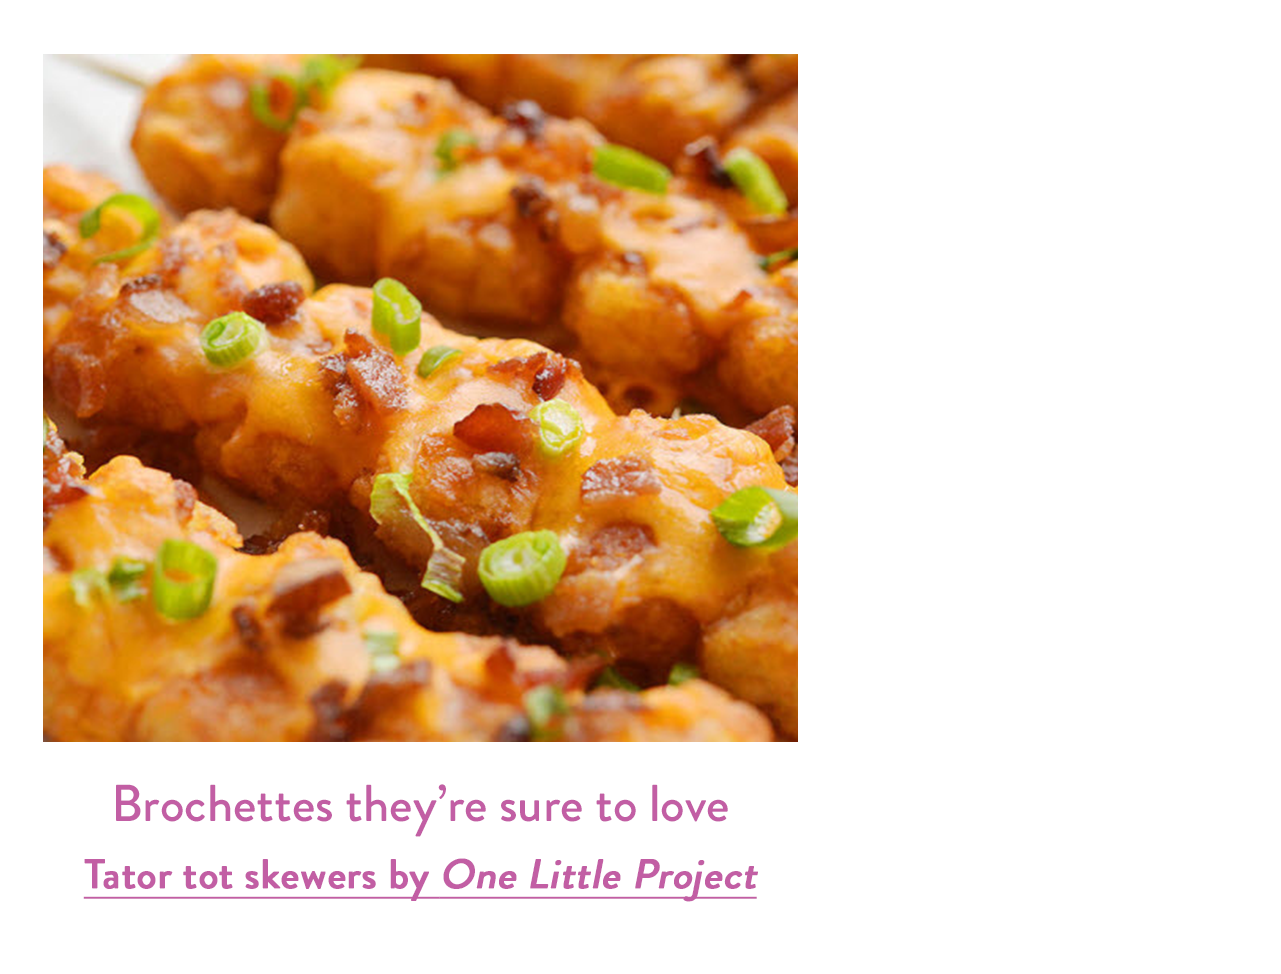 Brochettes they’re sure to love